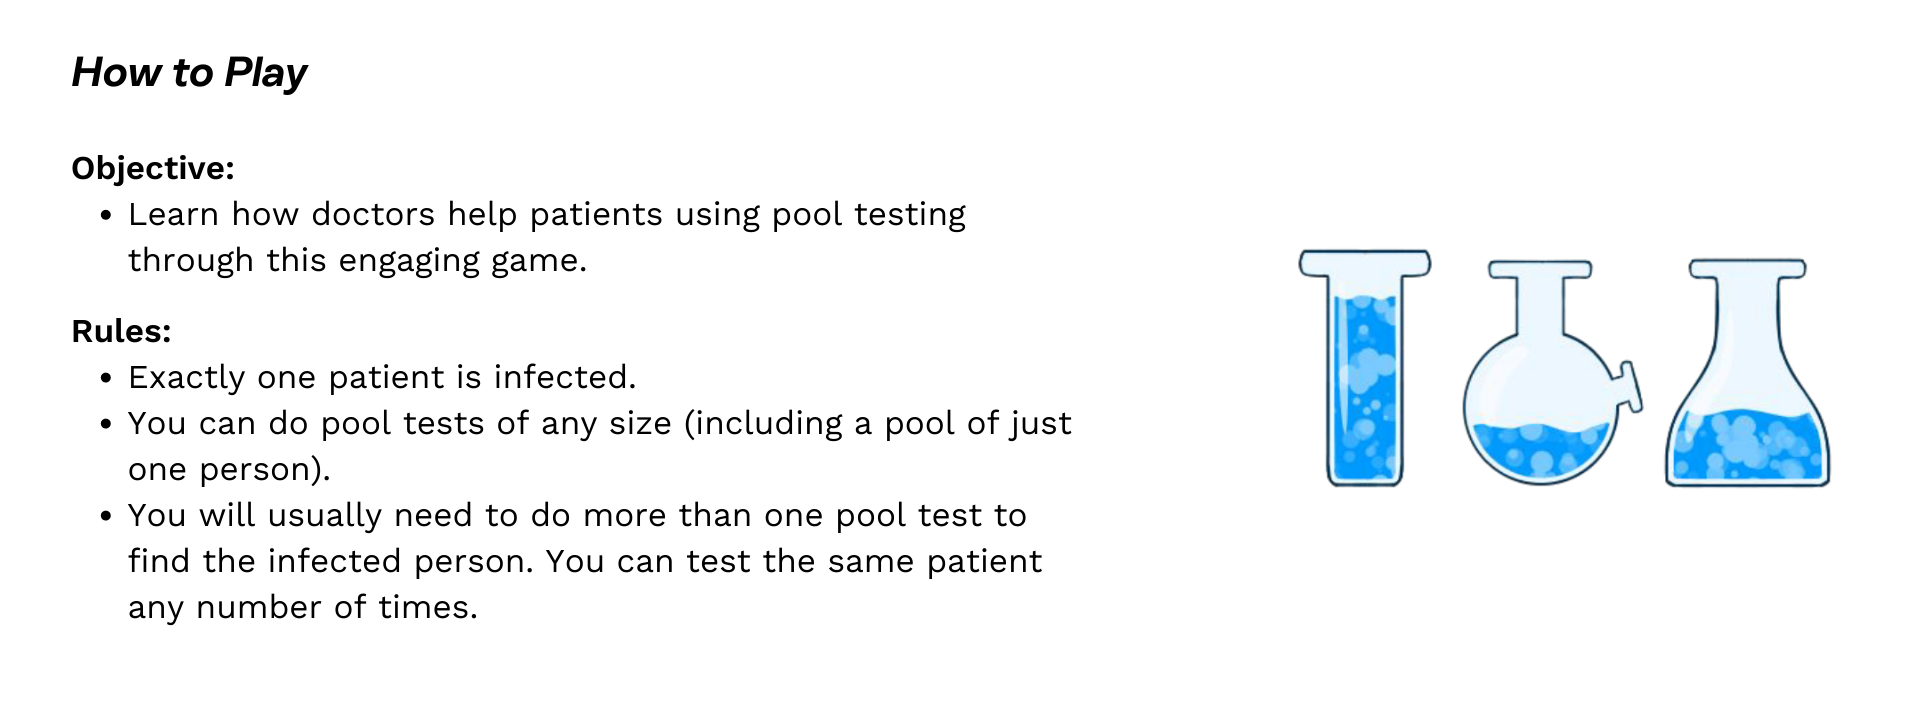 Objective: Learn how doctors help patients using pool testing through this engaging game.